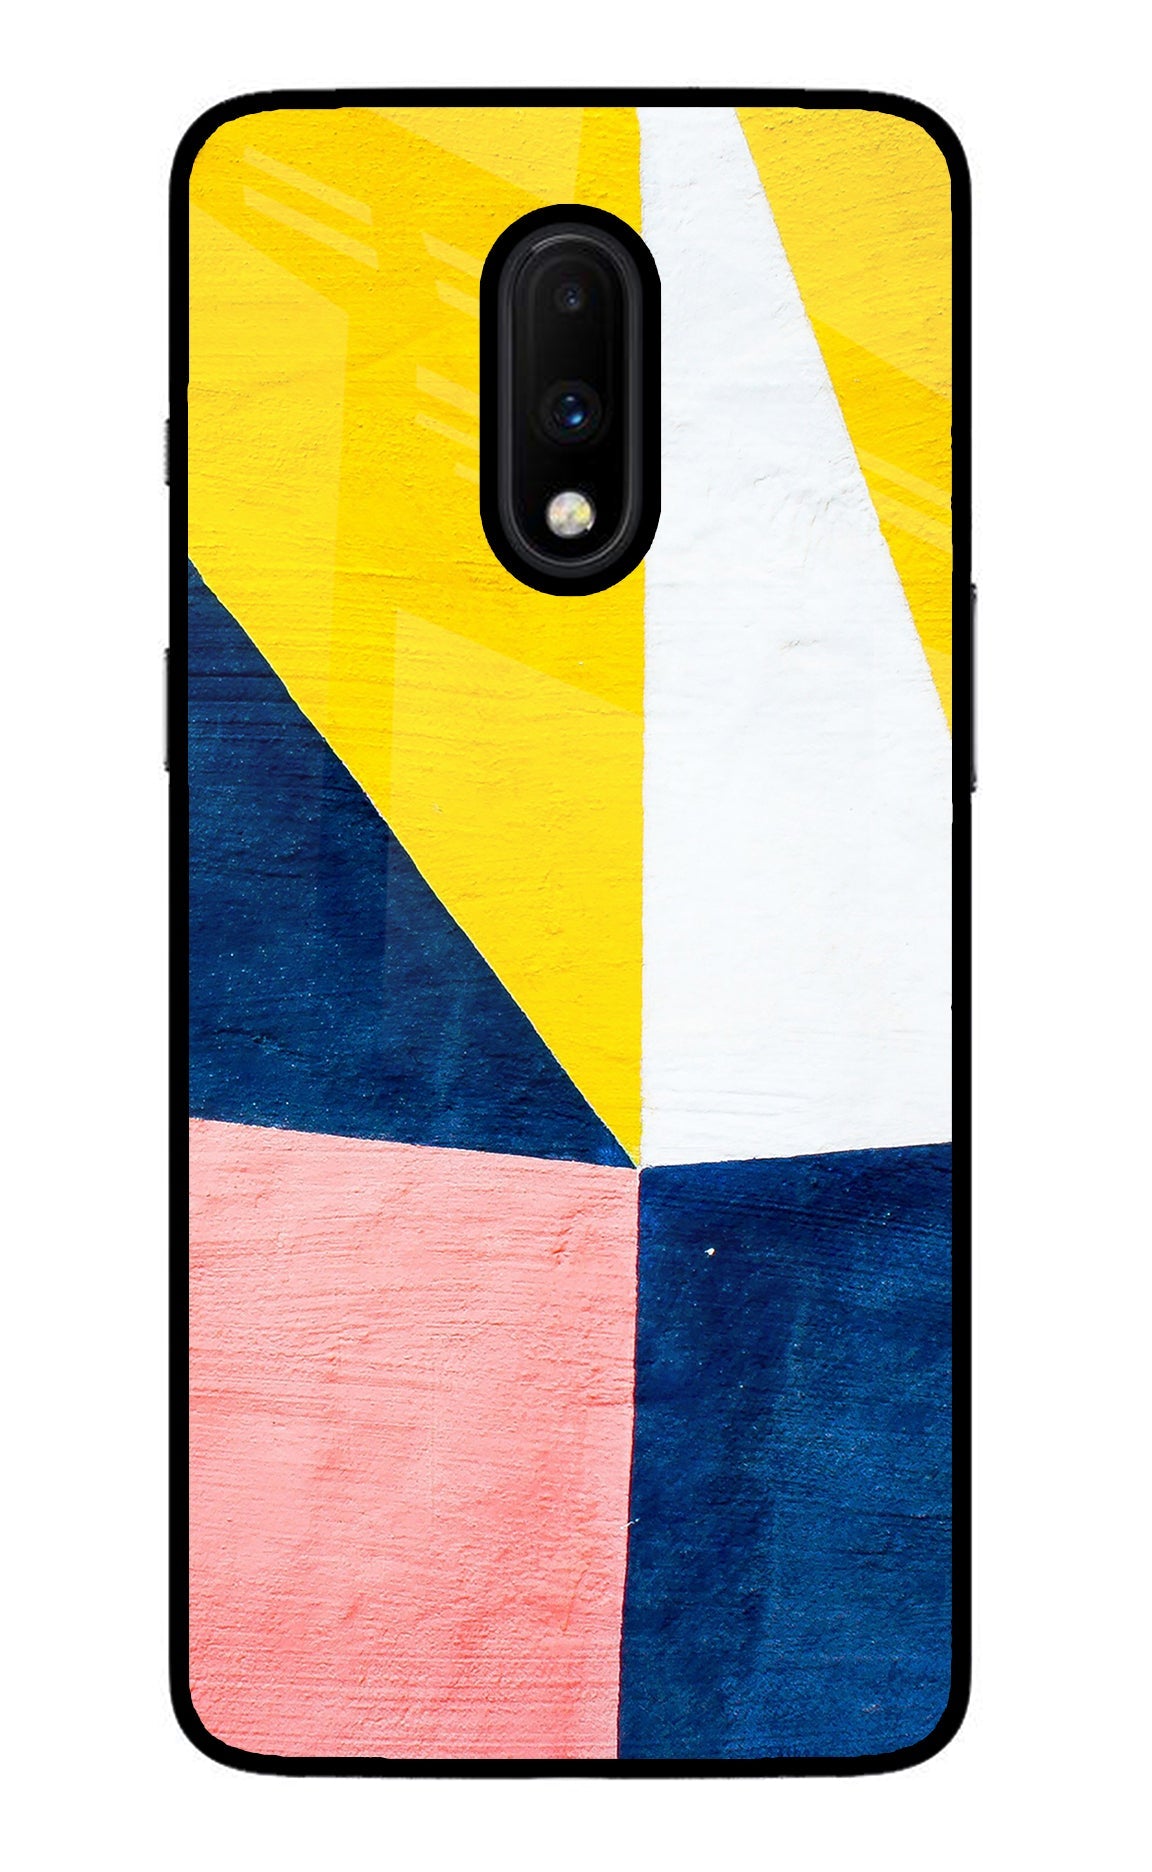 Colourful Art Oneplus 7 Glass Case